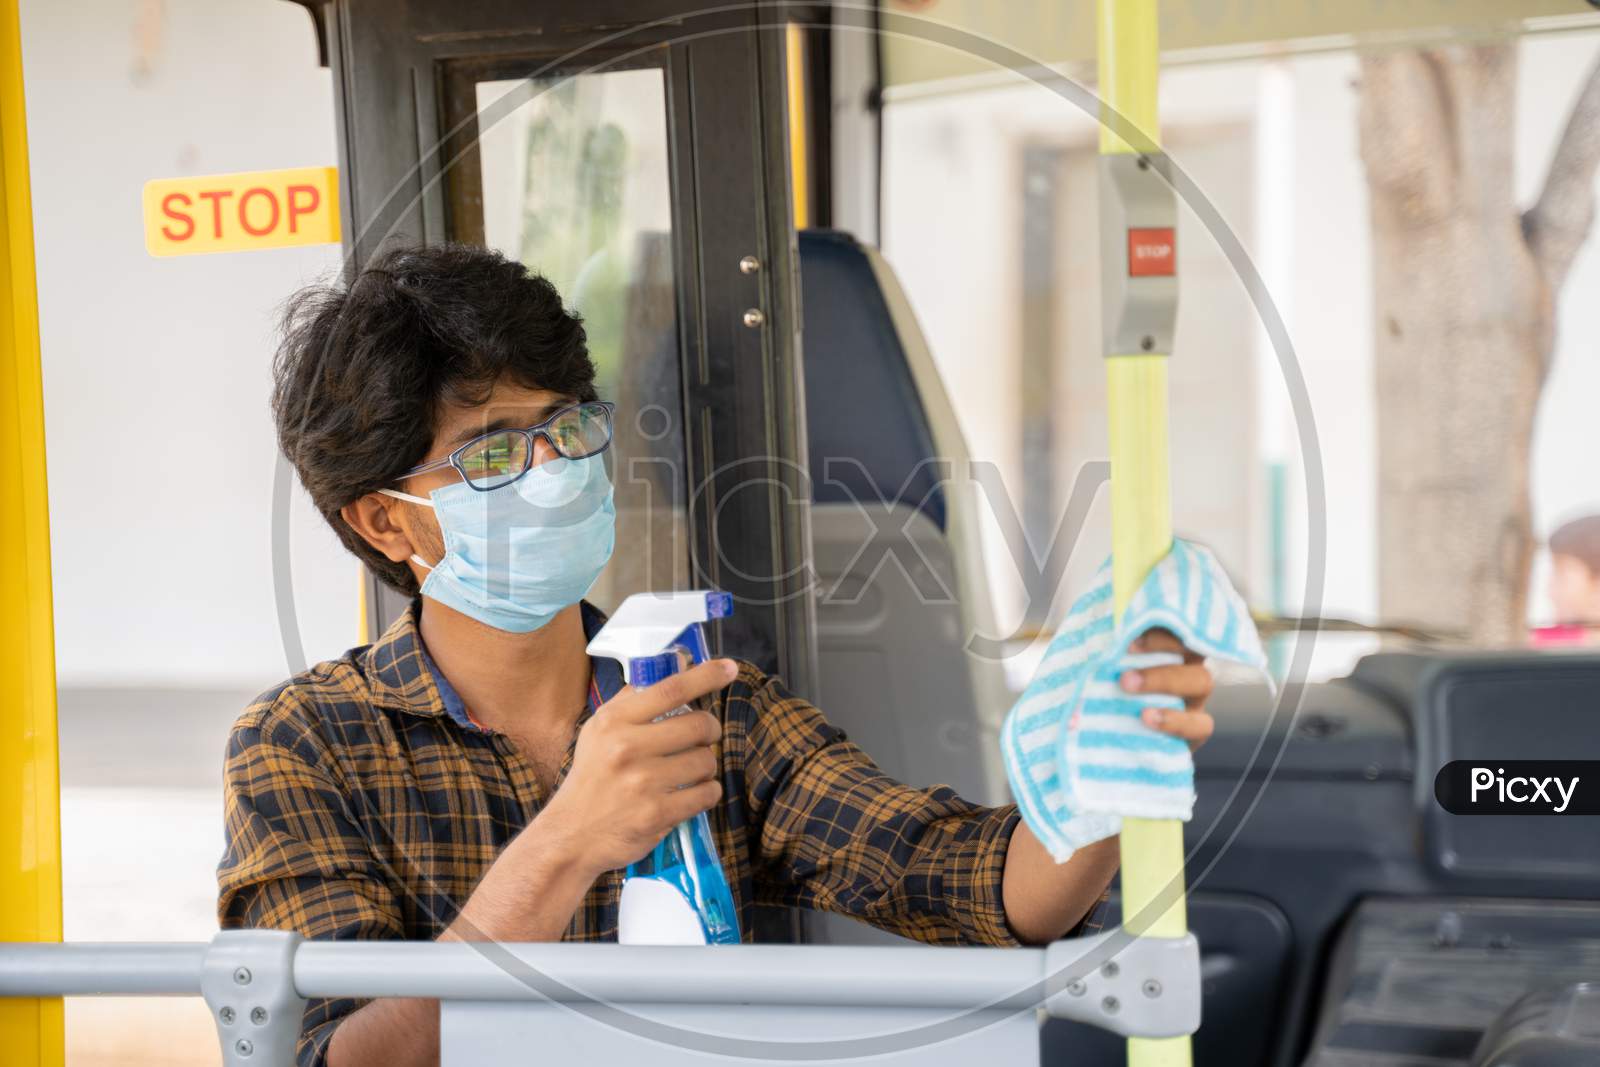 Young Man In Medical Mask Disinfecting Or Sanitizing Bus By Using Alcohol Disinfectant Spray To Protect People From Coronavirus Or Covid-19 Infection.